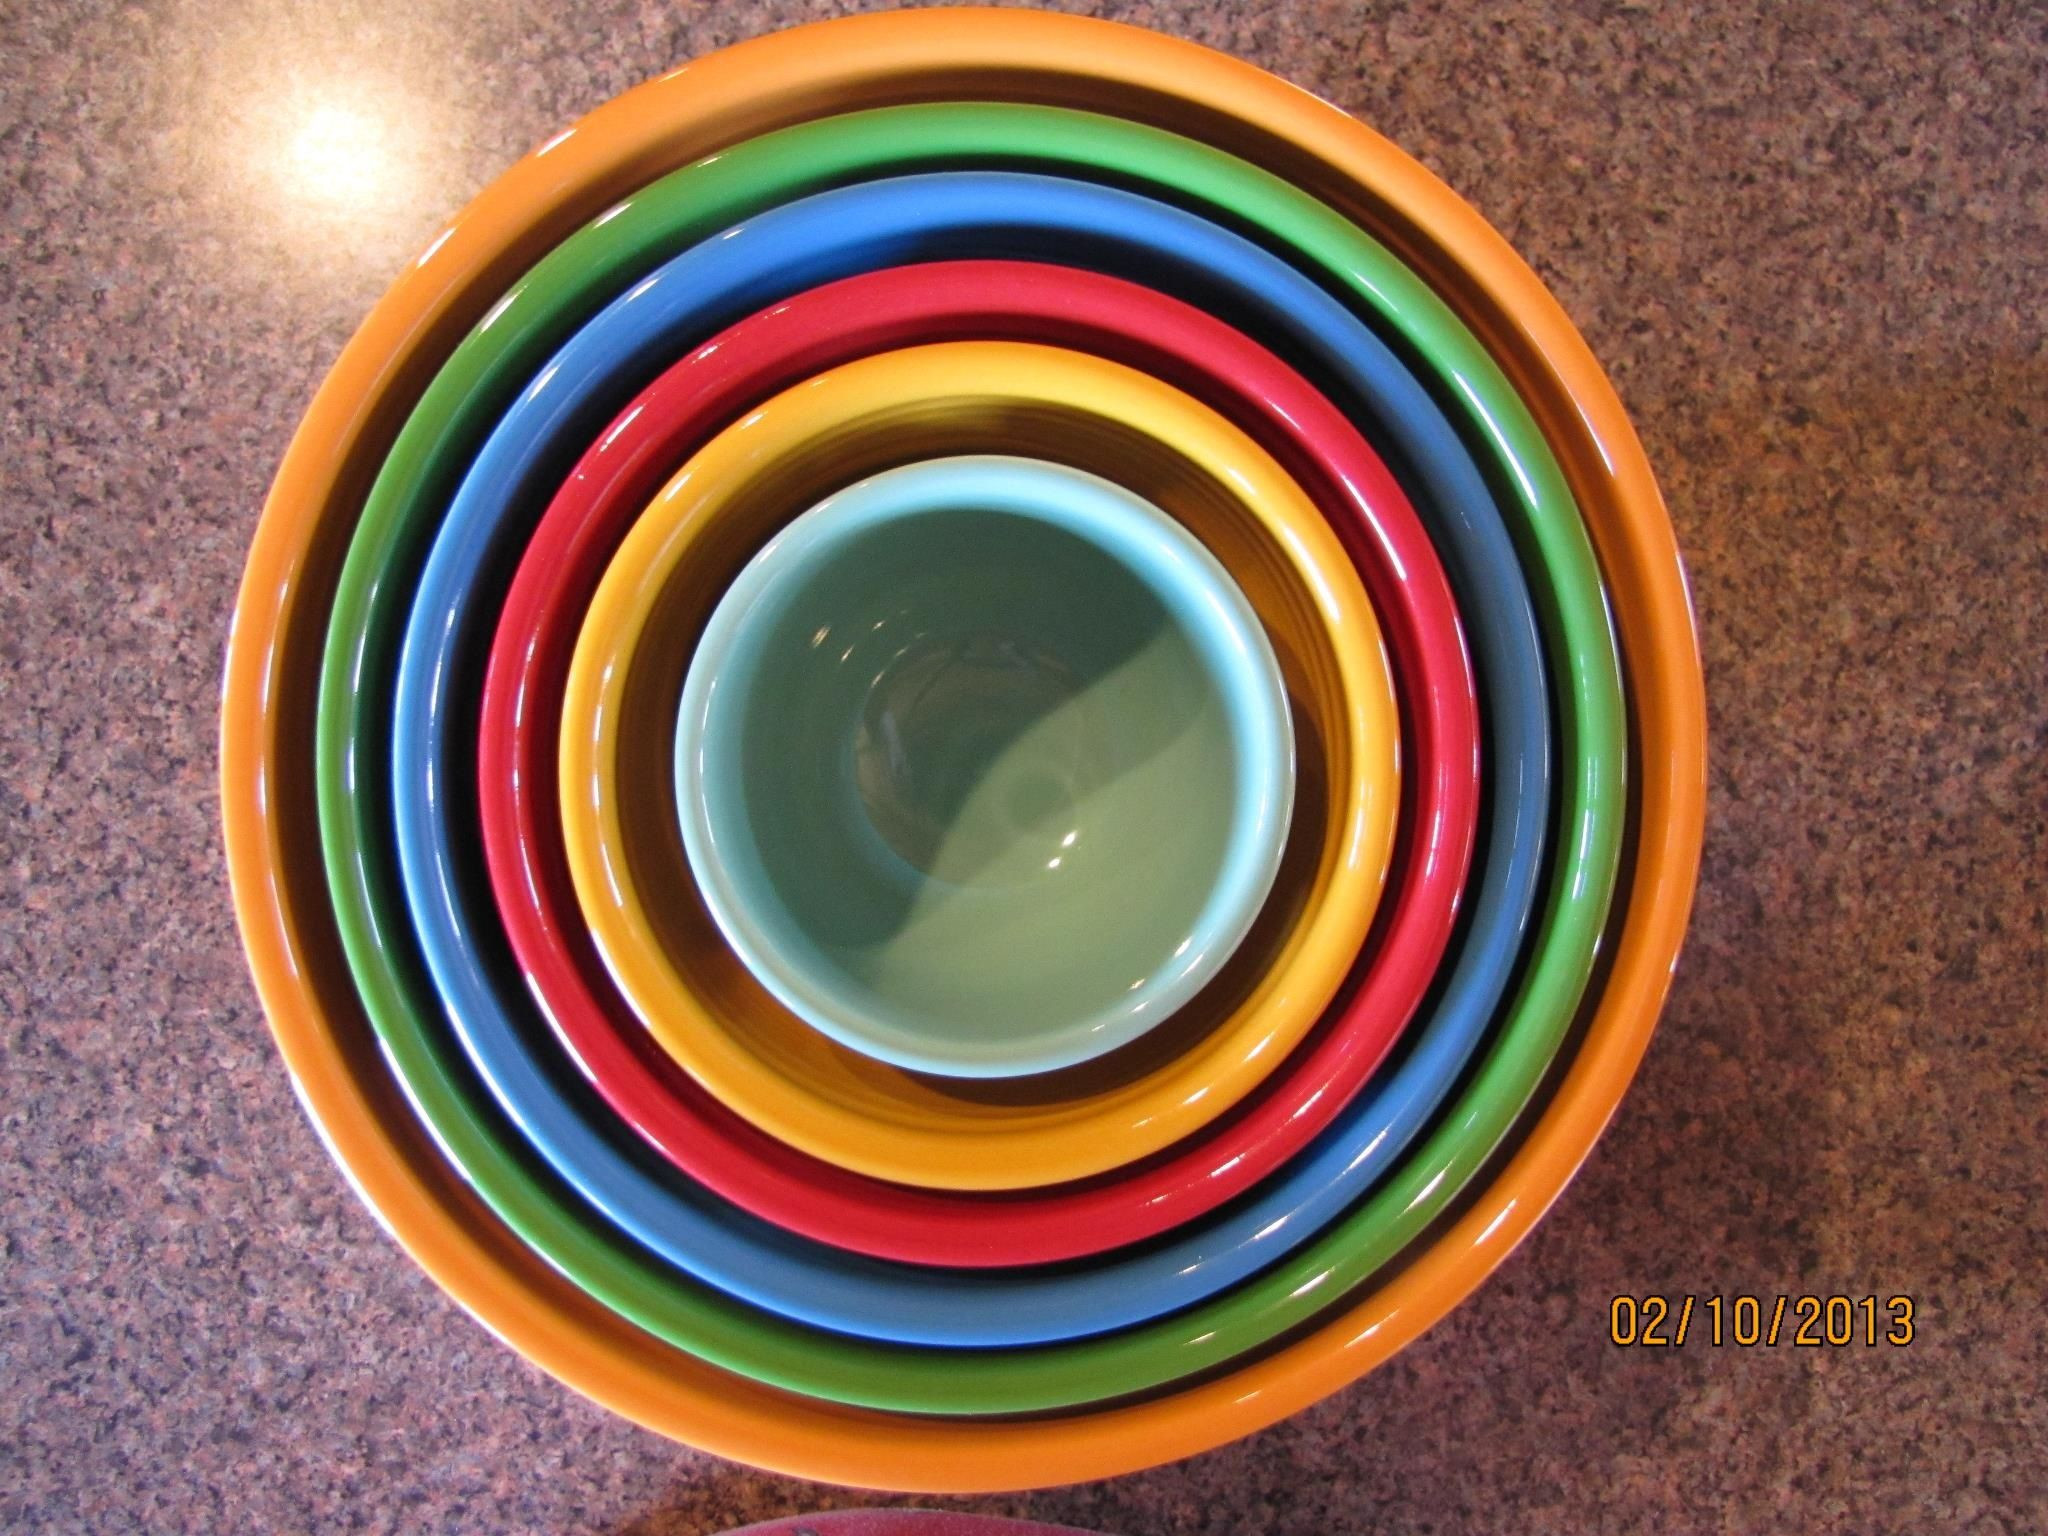 23 Famous Fiestaware Vase Prices 2024 free download fiestaware vase prices of fiestaa nested bowls this set includes a 3 piece baking bowl set a with regard to this set includes a 3 piece baking bowl set a 2 piece prep bowl set and a chili bo